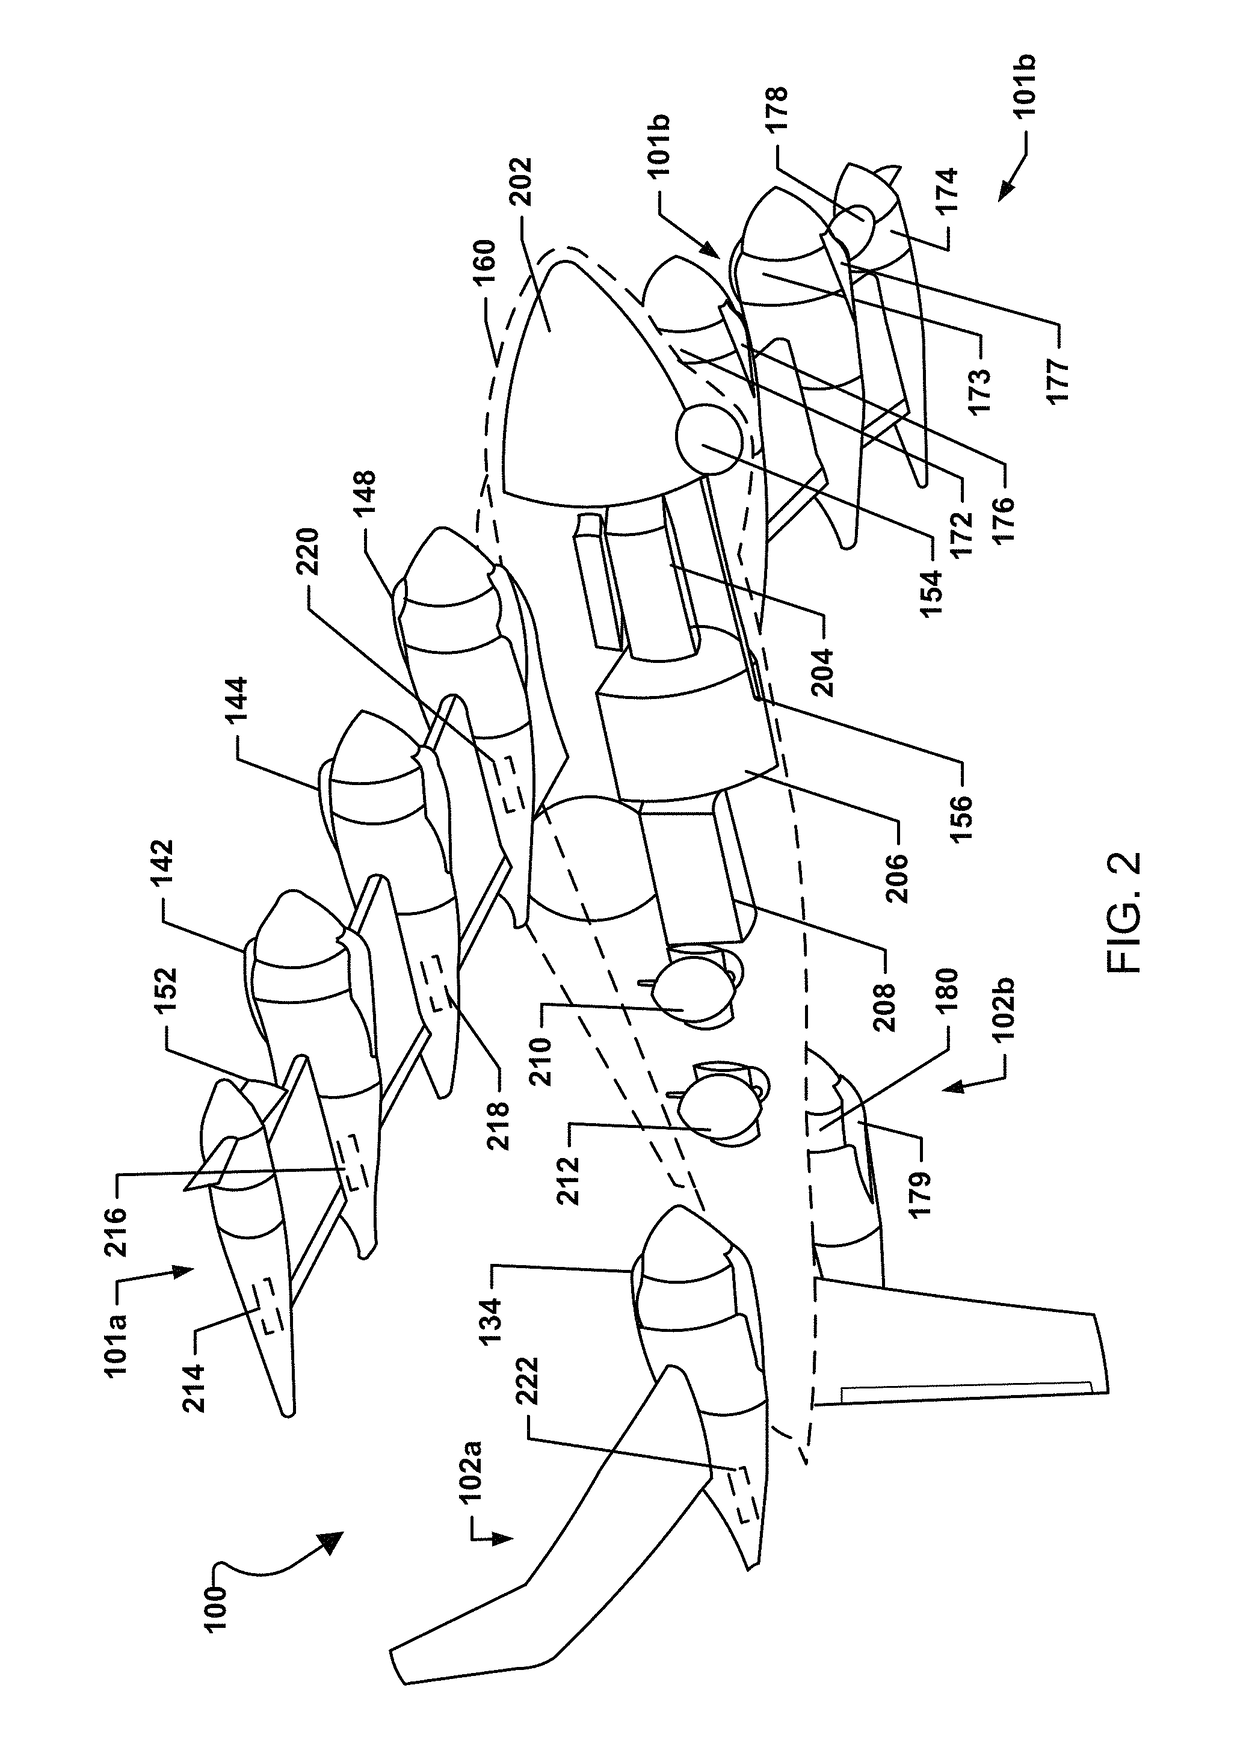 Tri-rotor aircraft capable of vertical takeoff and landing and transitioning to forward flight